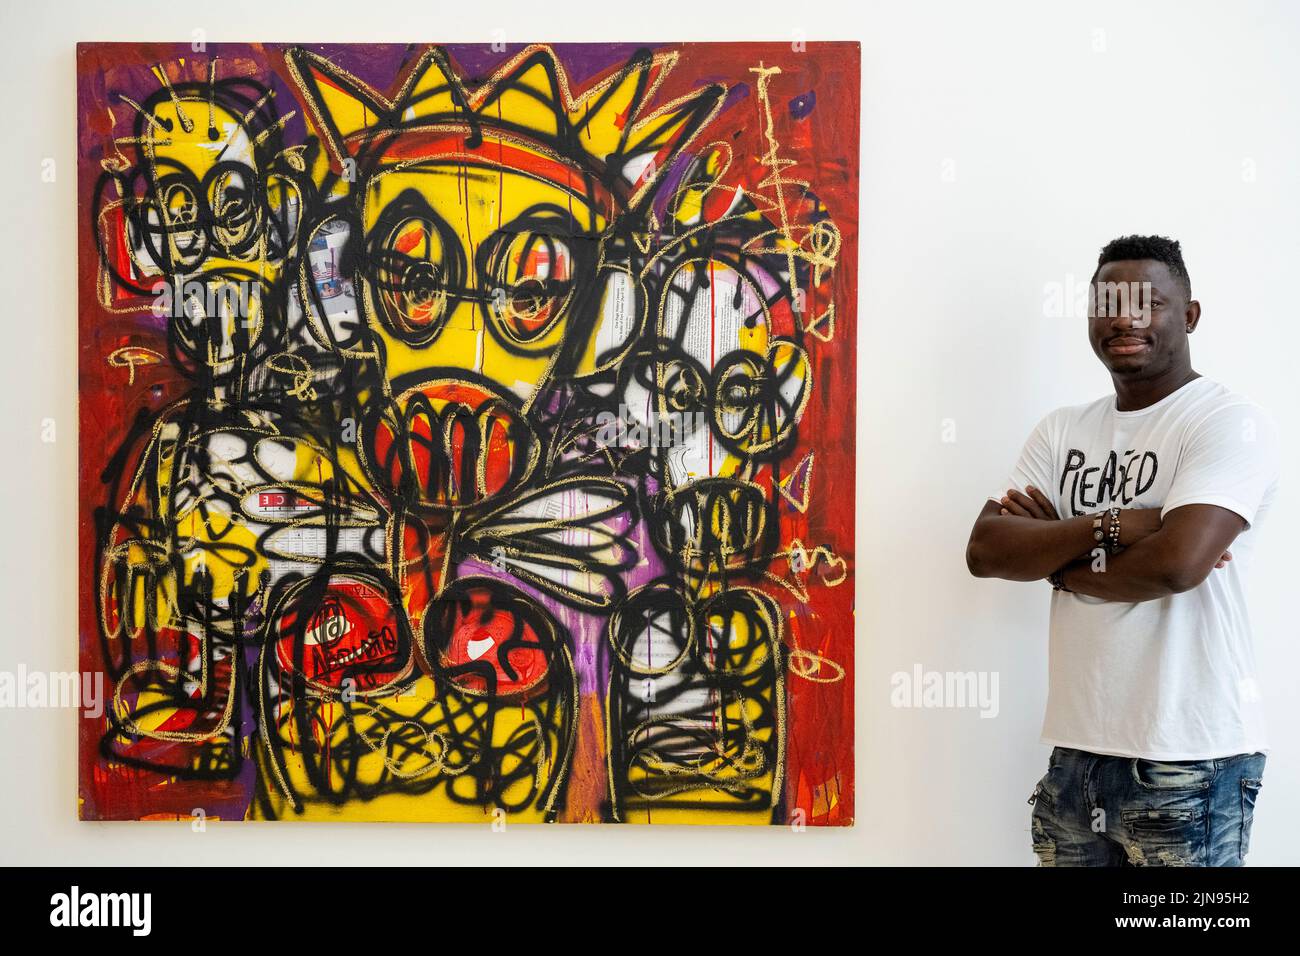 London, UK.  10 August 2022.  Artist Aboudia with his work 'Untitled', 2018, at a preview of ‘Different Throws of Dreams: Aboudia x Dubuffet’, an exhibition at Phillips Berkeley Square exploring the work of the artists Aboudia and Jean Dubuffet and shows how both artists examine the recurring theme of movement in their works through the use of found objects and unorthodox materials.  The works are for sale in an exhibition which runs for the month of August.  Credit: Stephen Chung / Alamy Live News Stock Photo